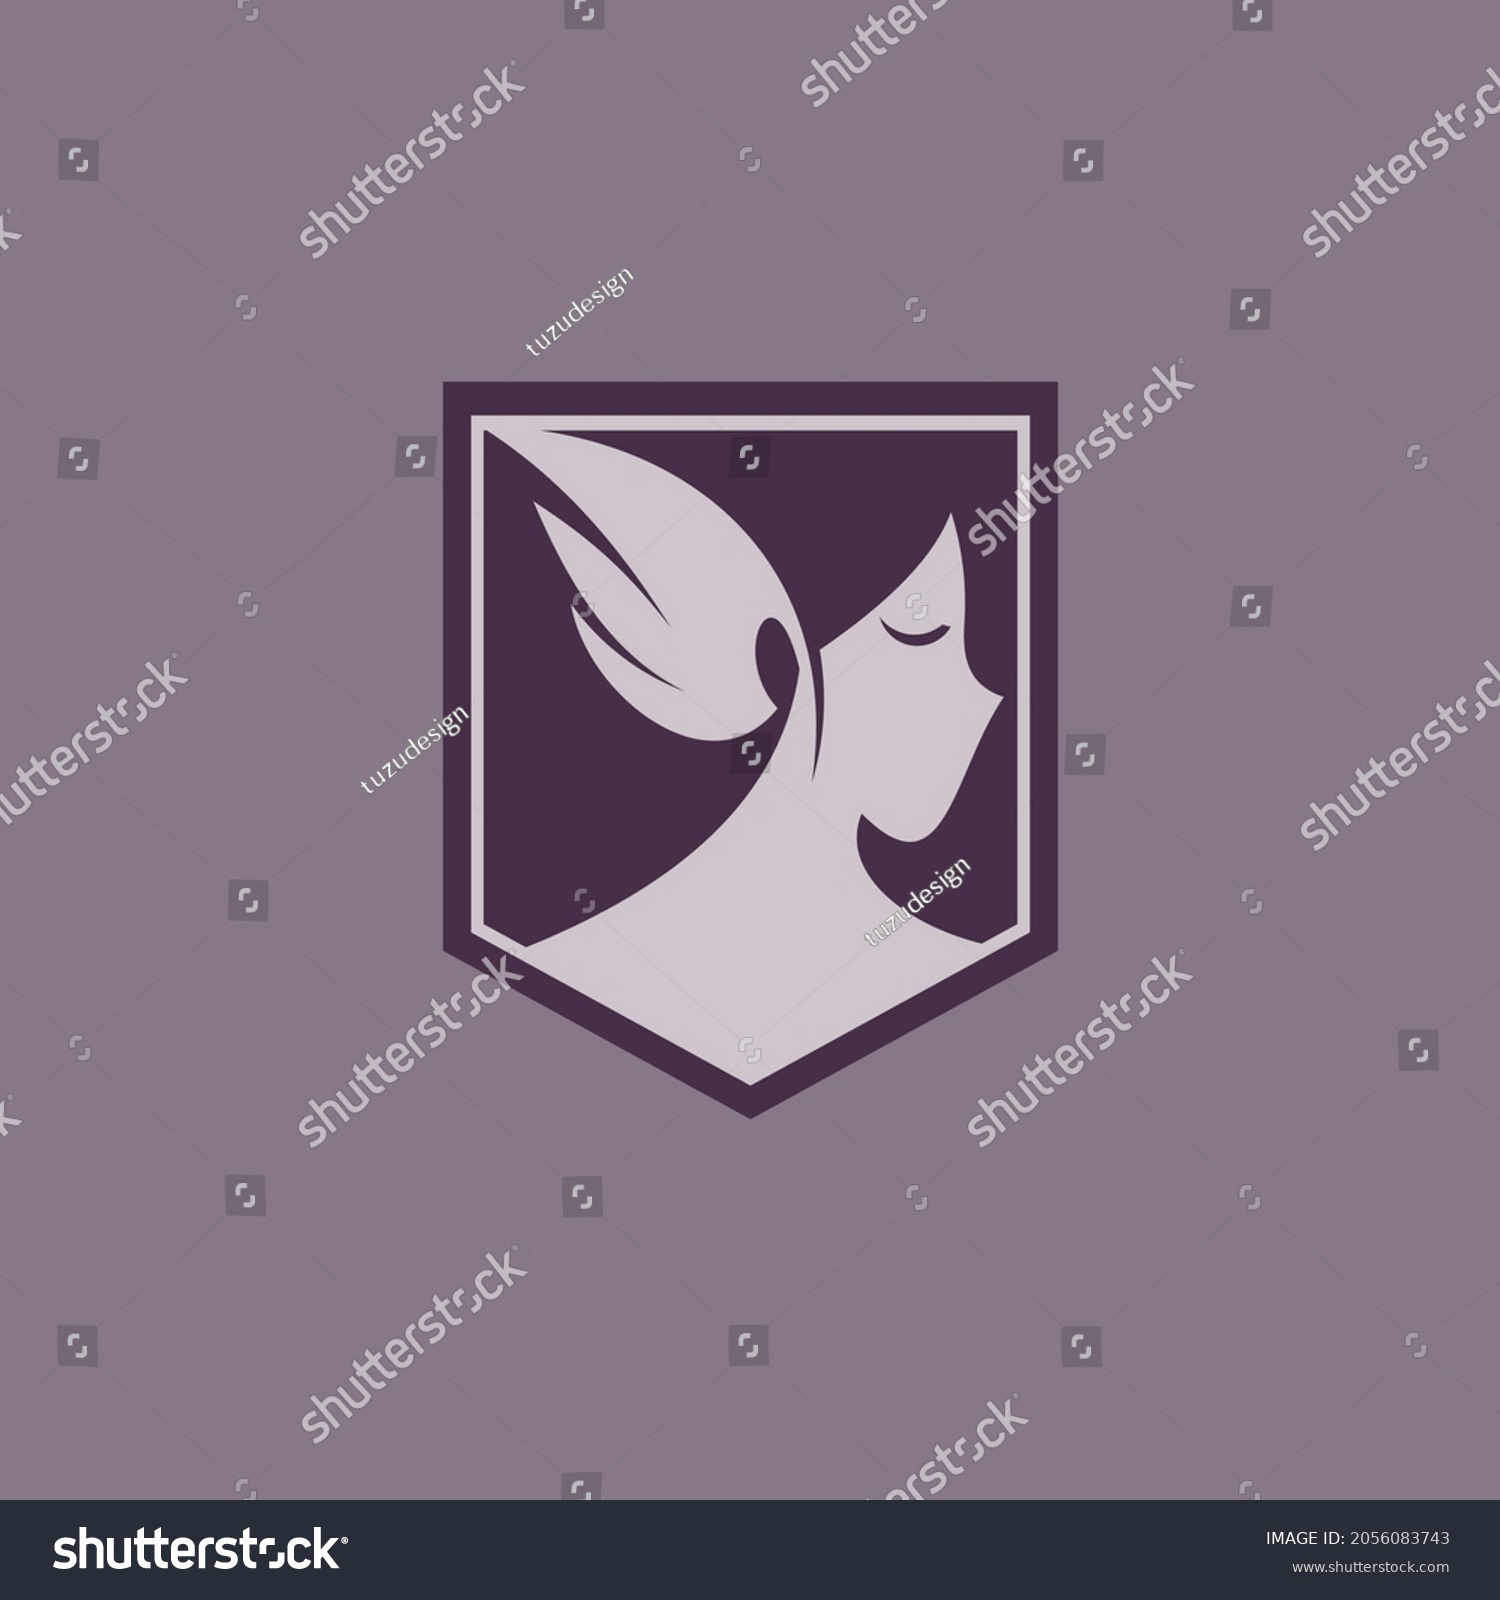 SVG of simple valkyrie, woman, knight logo. vector illustration for business logo or icon svg